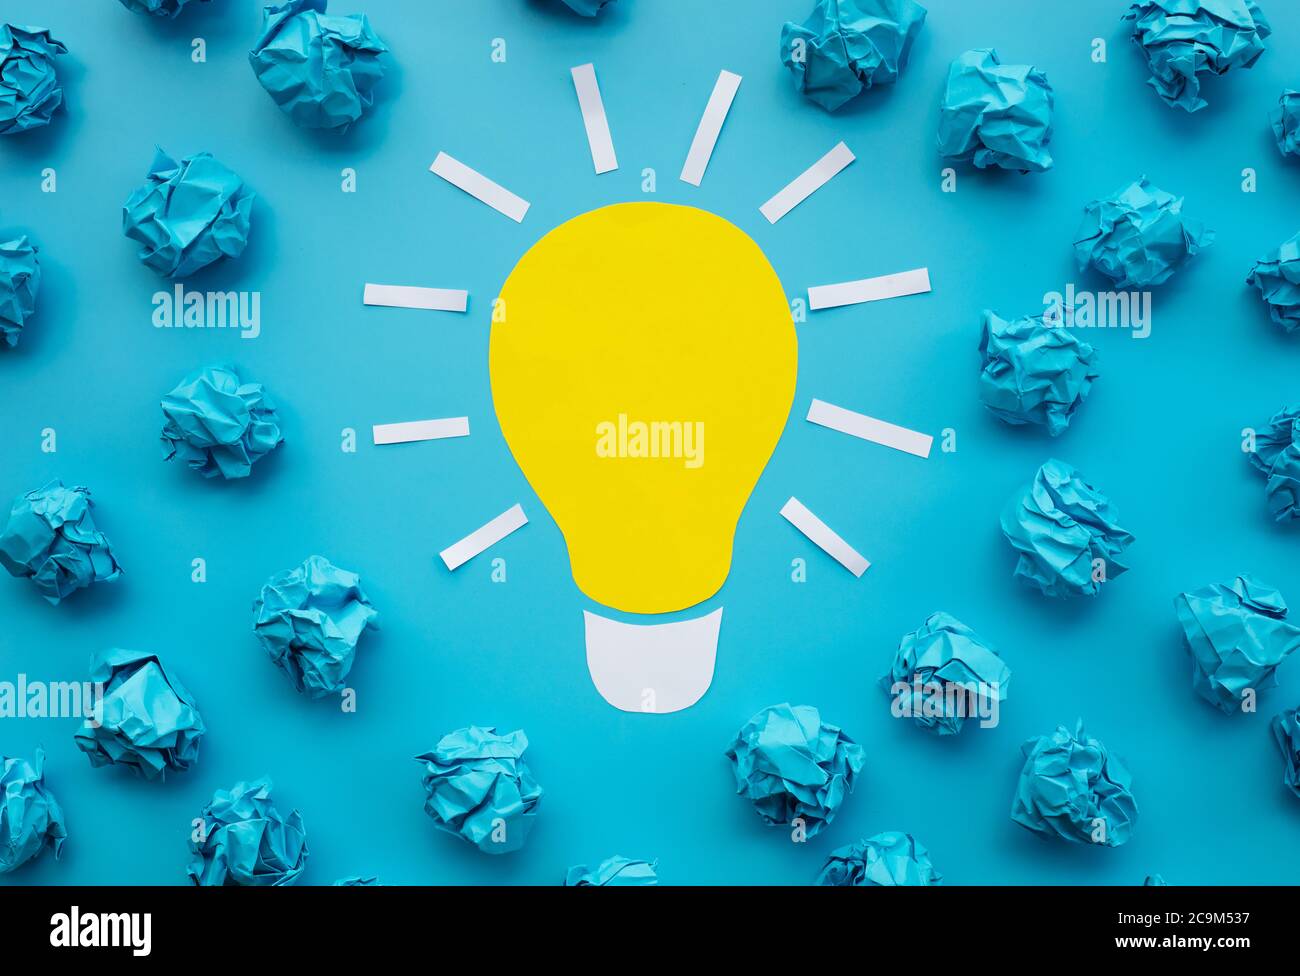 Outstanding idea and creativity concepts with light bulb and paper crumpled ball.Think out of box.Business solution. Stock Photo